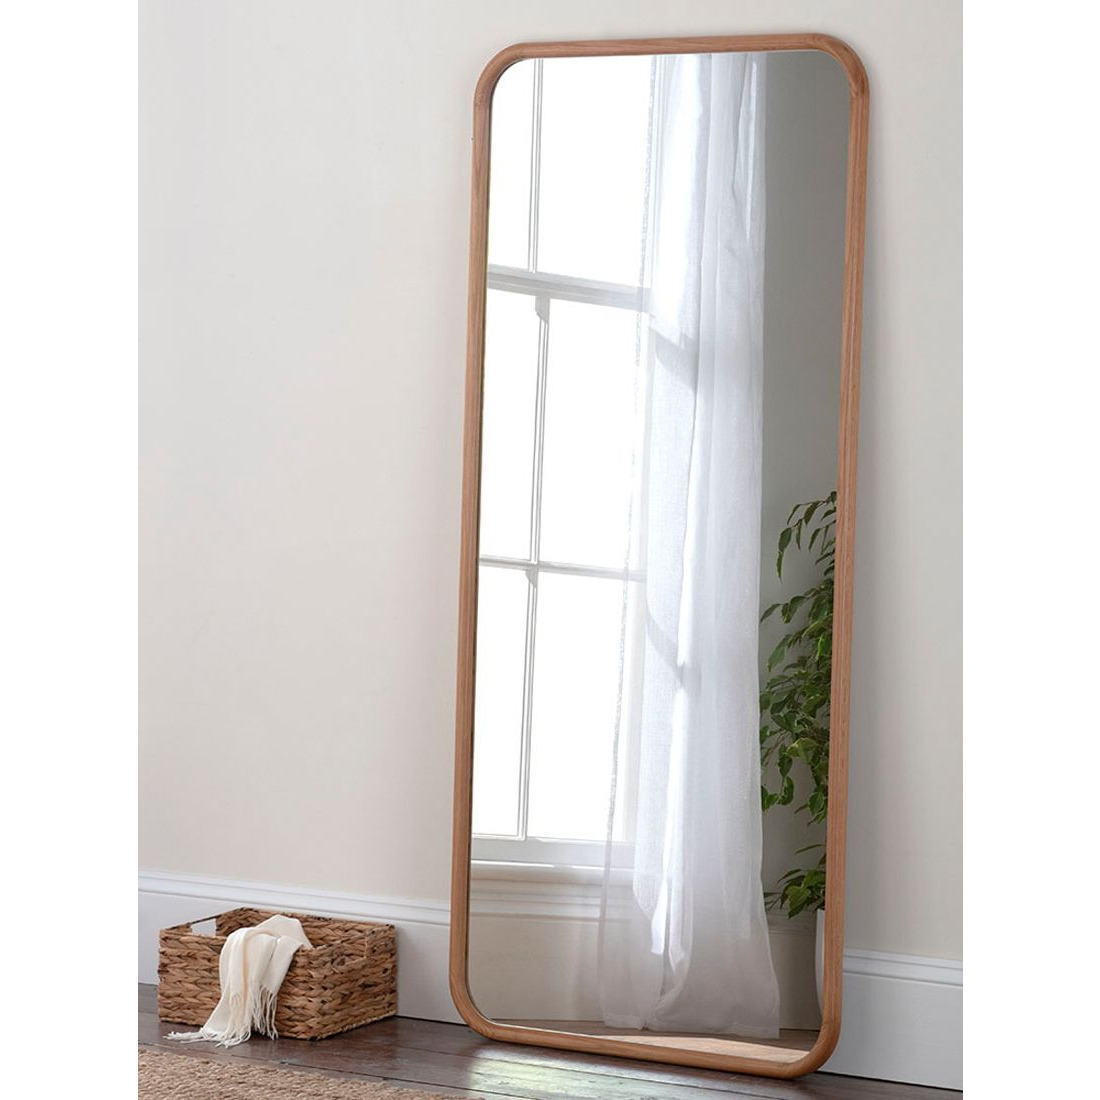 Yearn Sherwood Solid Oak Wood Frame Full-Length Wall/Leaner Mirror, 180 x 80cm, Natural - image 1